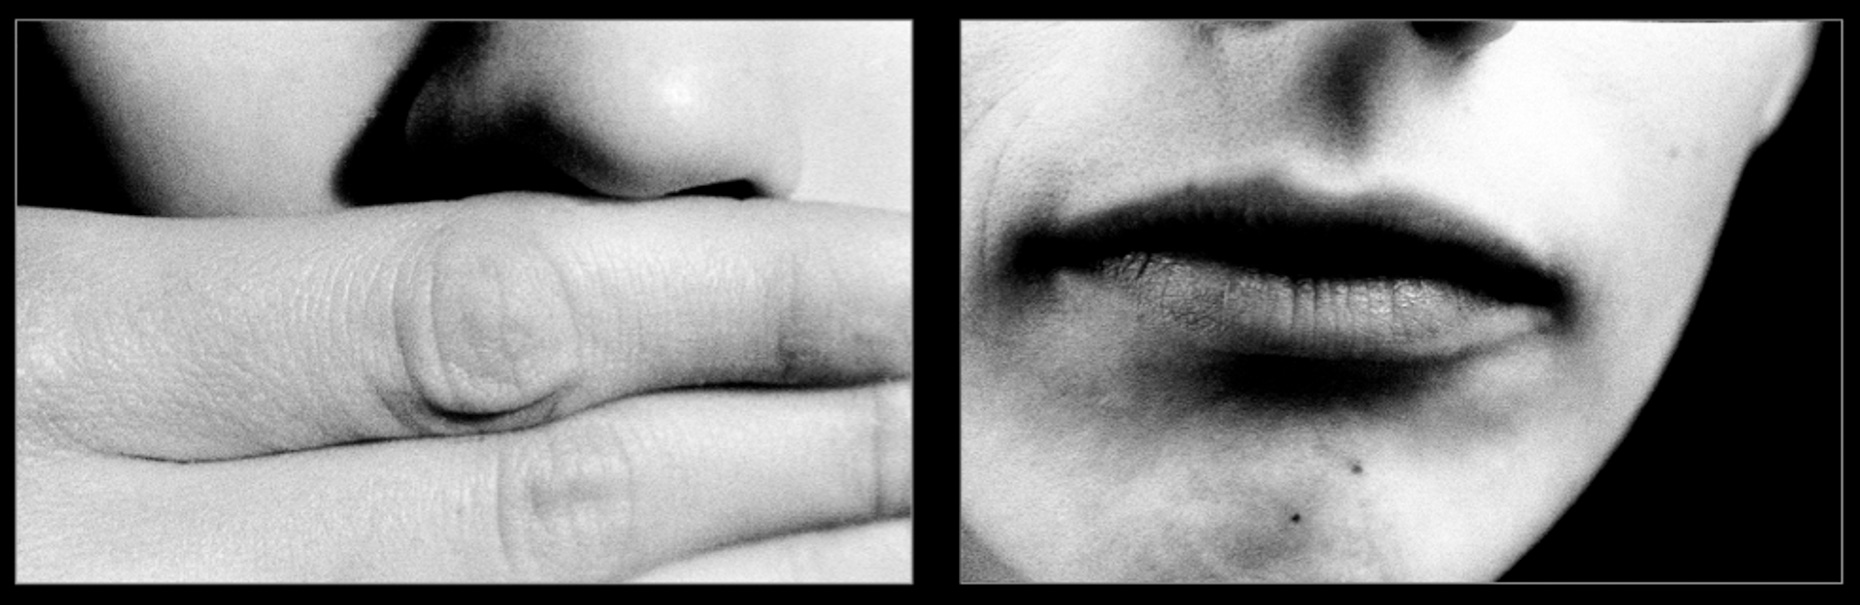 "Keeping a Secret", Washington D.C.  1976,  Contemporary Art Photography, Black & White Photography, Photo-Sequence, Diptych Photography, Visual Memories Series